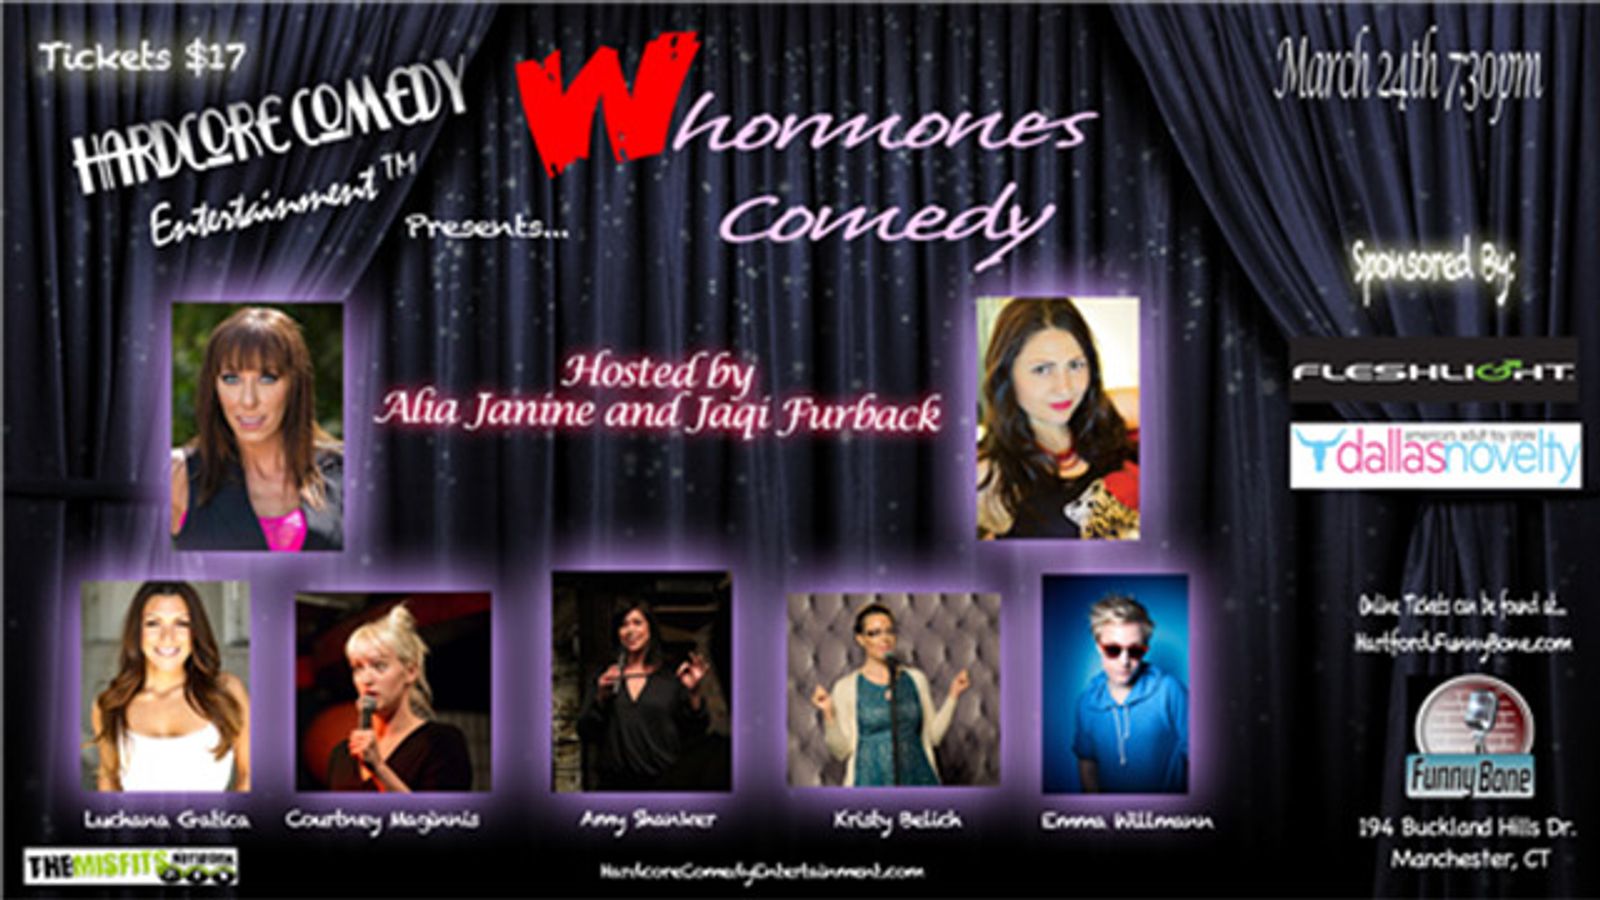 Whormones Comedy Returns to Funny Bone in Manchester, CT